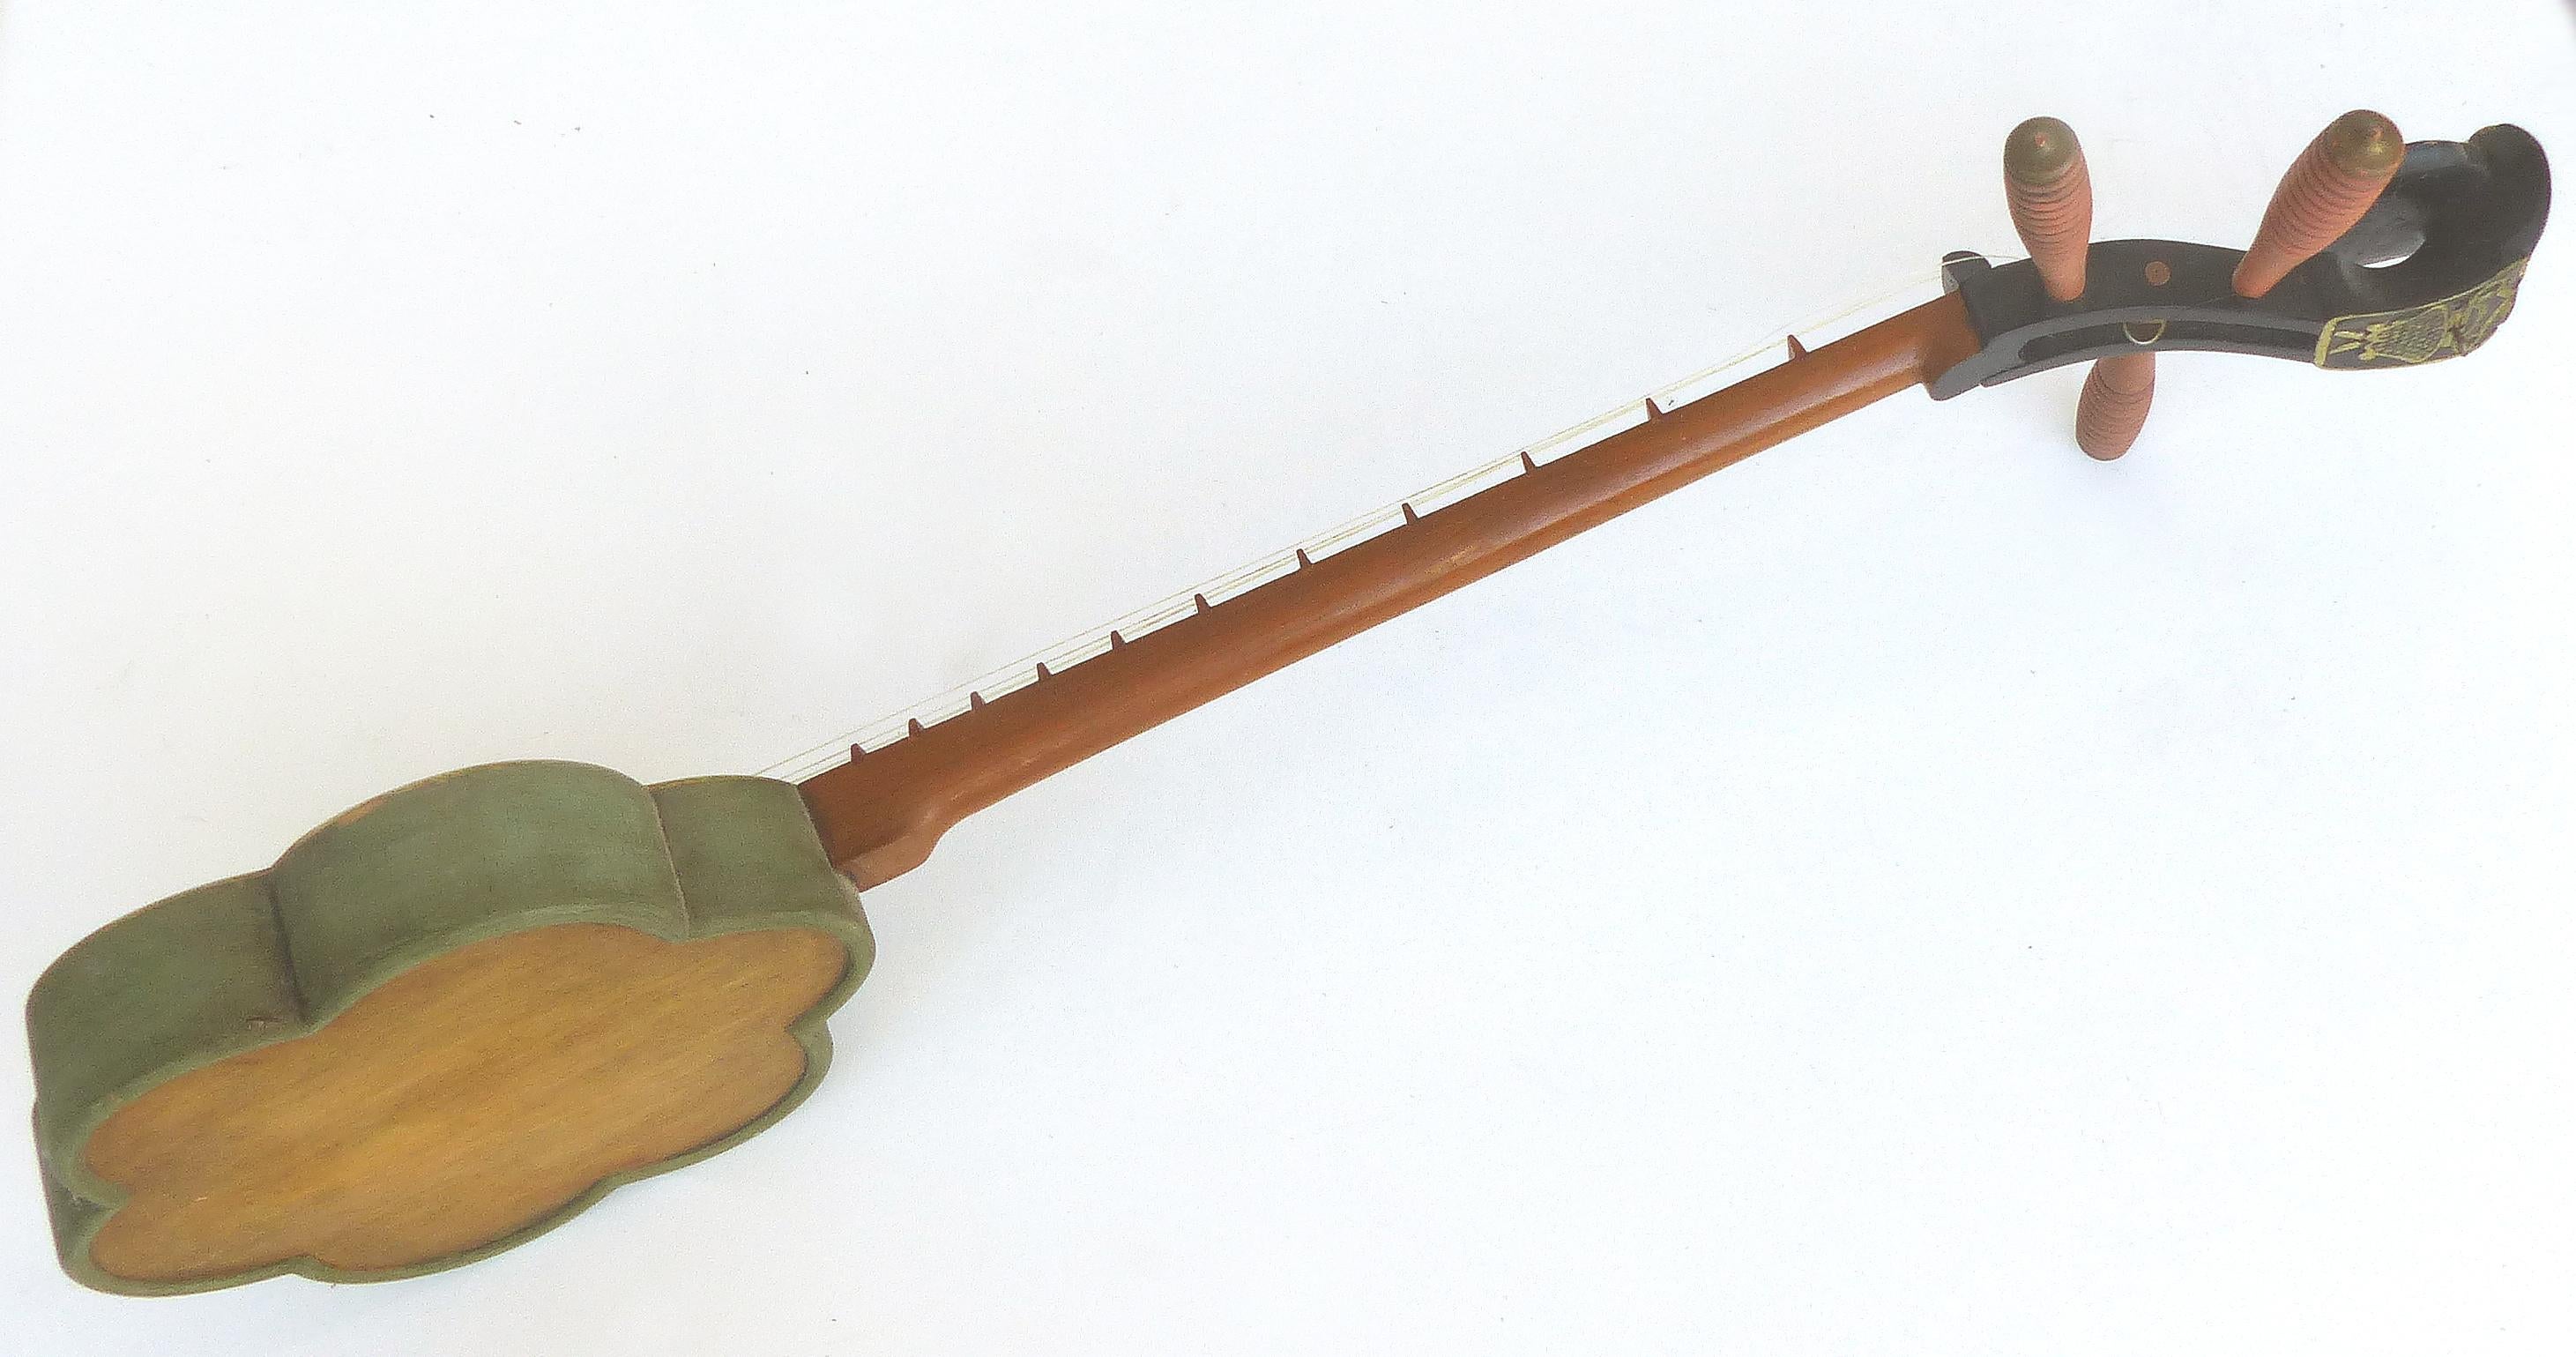 Dan Sen 3-String Flower Lute Instrument for Display

A Dan Sen 3-string lute with a flower form body. Originating in Vietnam, the Dan Sen is also known as the moon lute or moon guitar. The tuning keys are adorned with an ornately carved head. A